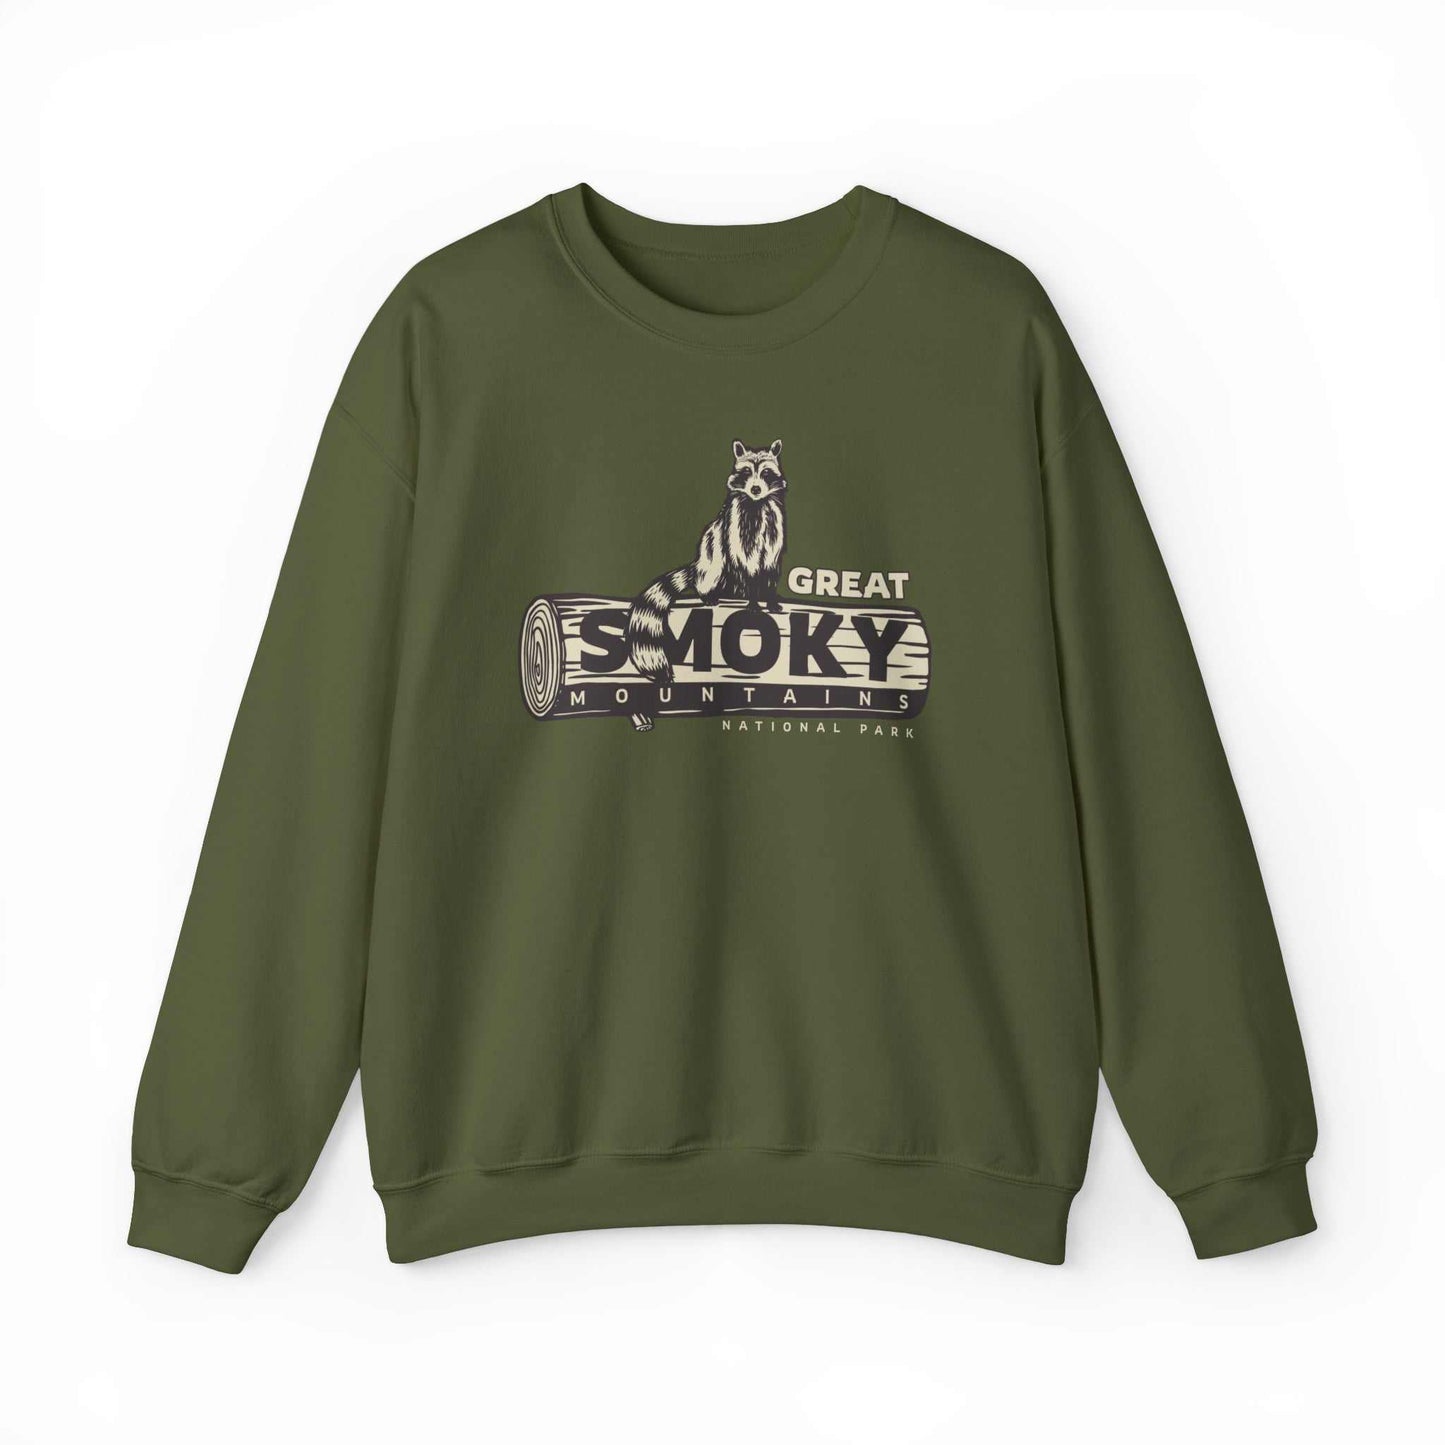 Friends of Great Smoky Mountains National Park Sweatshirt